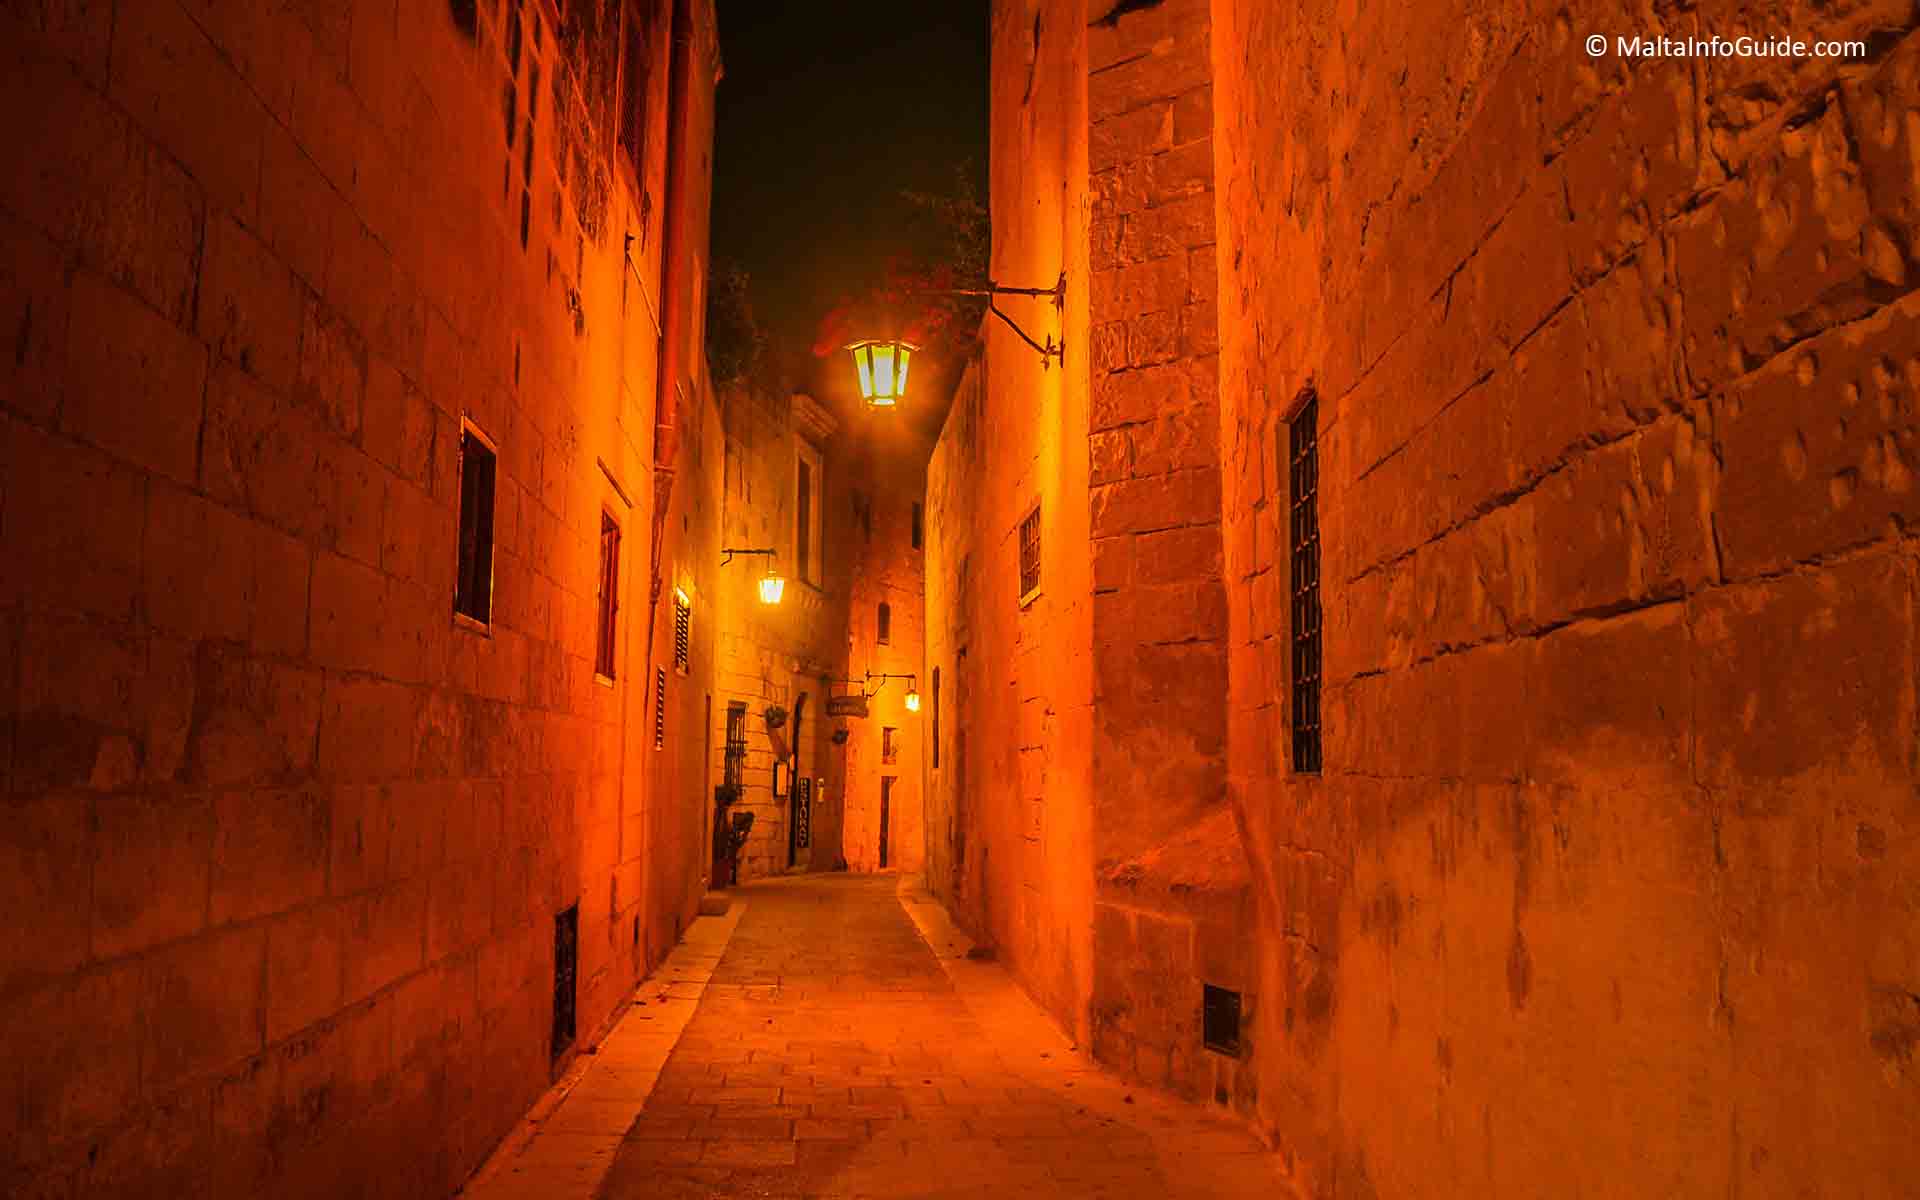 One of Mdina's narrow streets lit up at night.